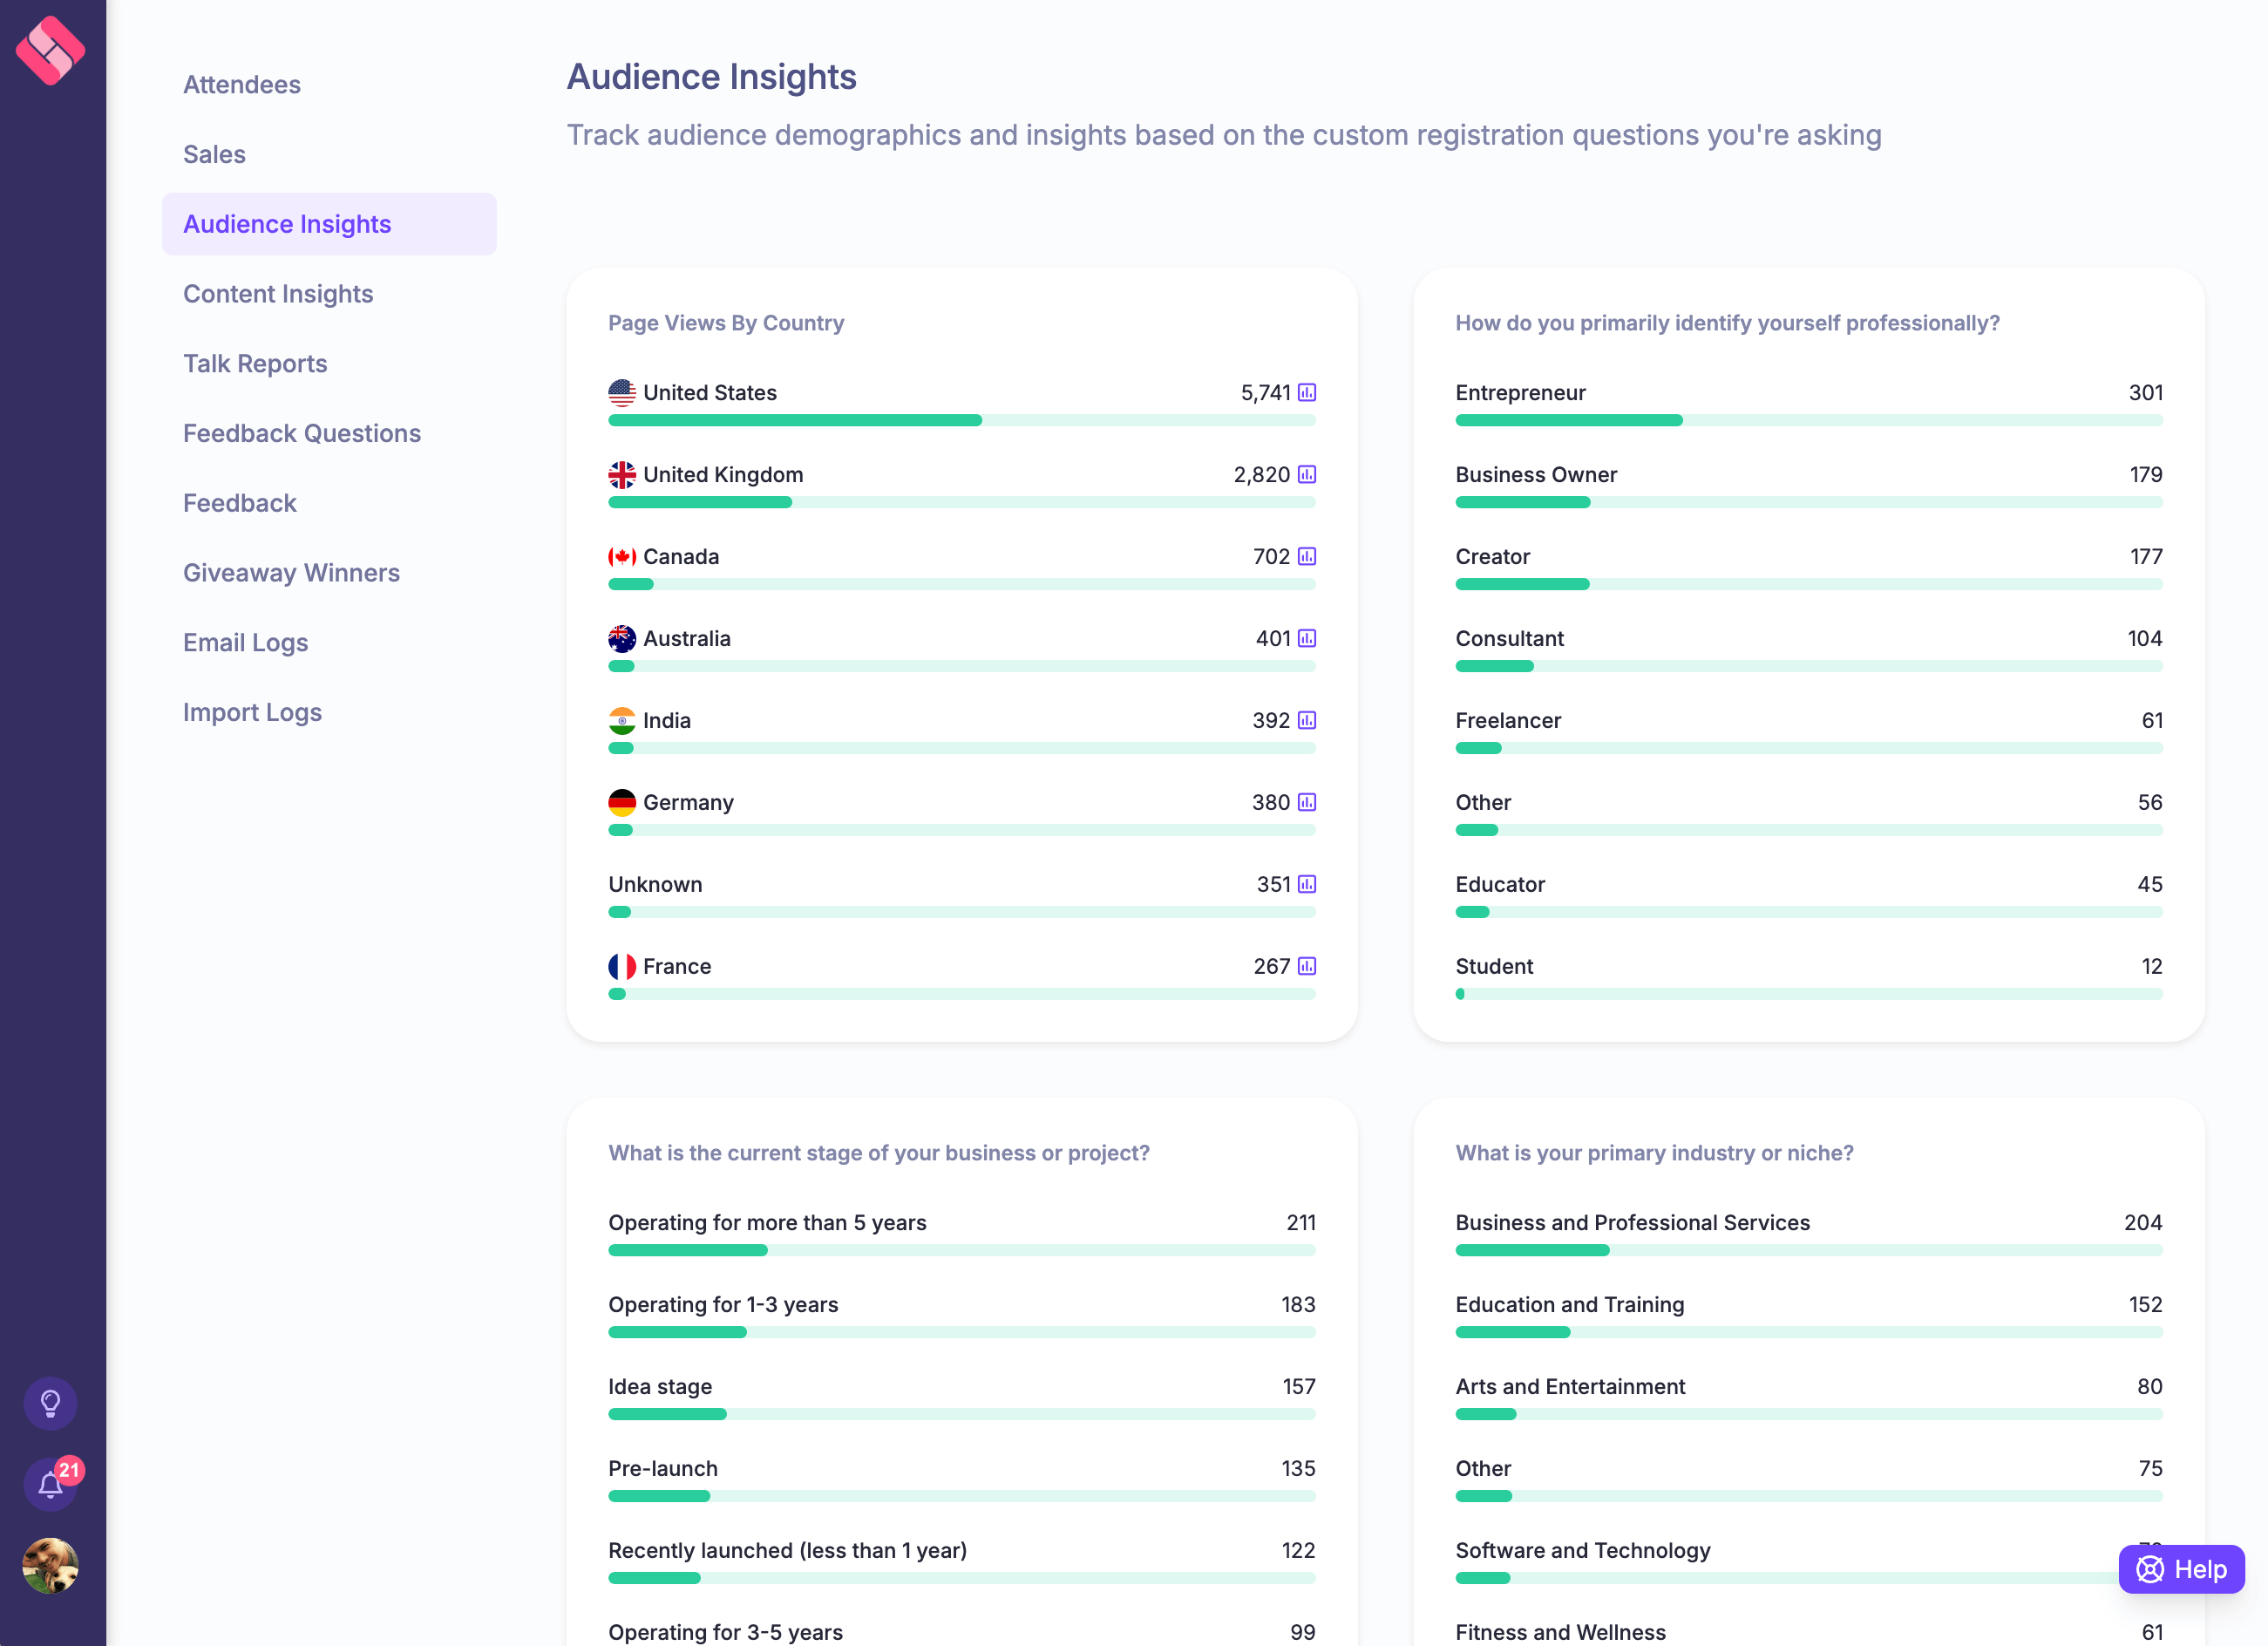 Track audience demographics and insights based on any custom registration questions you're asking.